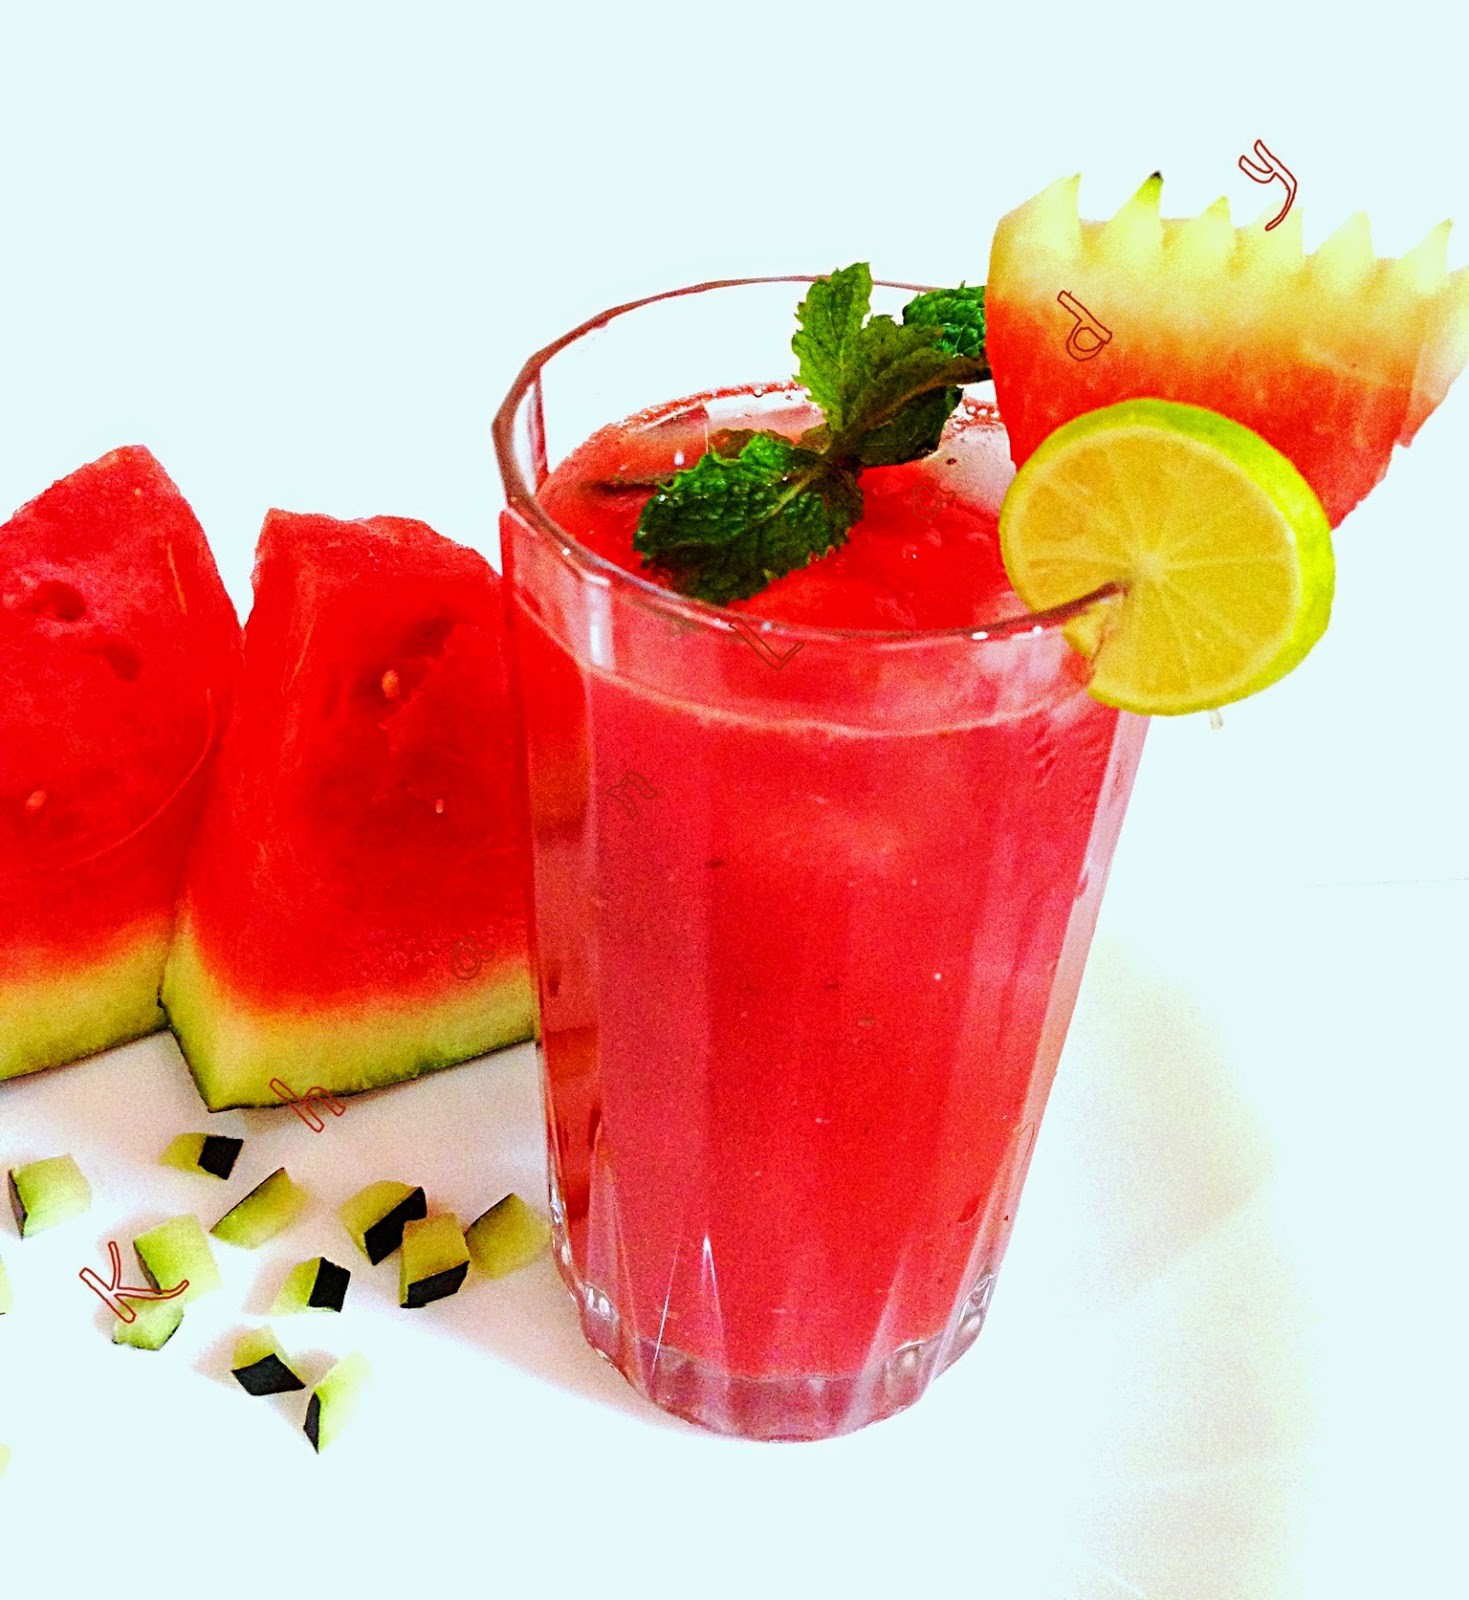 Simple Recipe To Make Watermelon Juice At Home Recipe Typical Of Kupang City